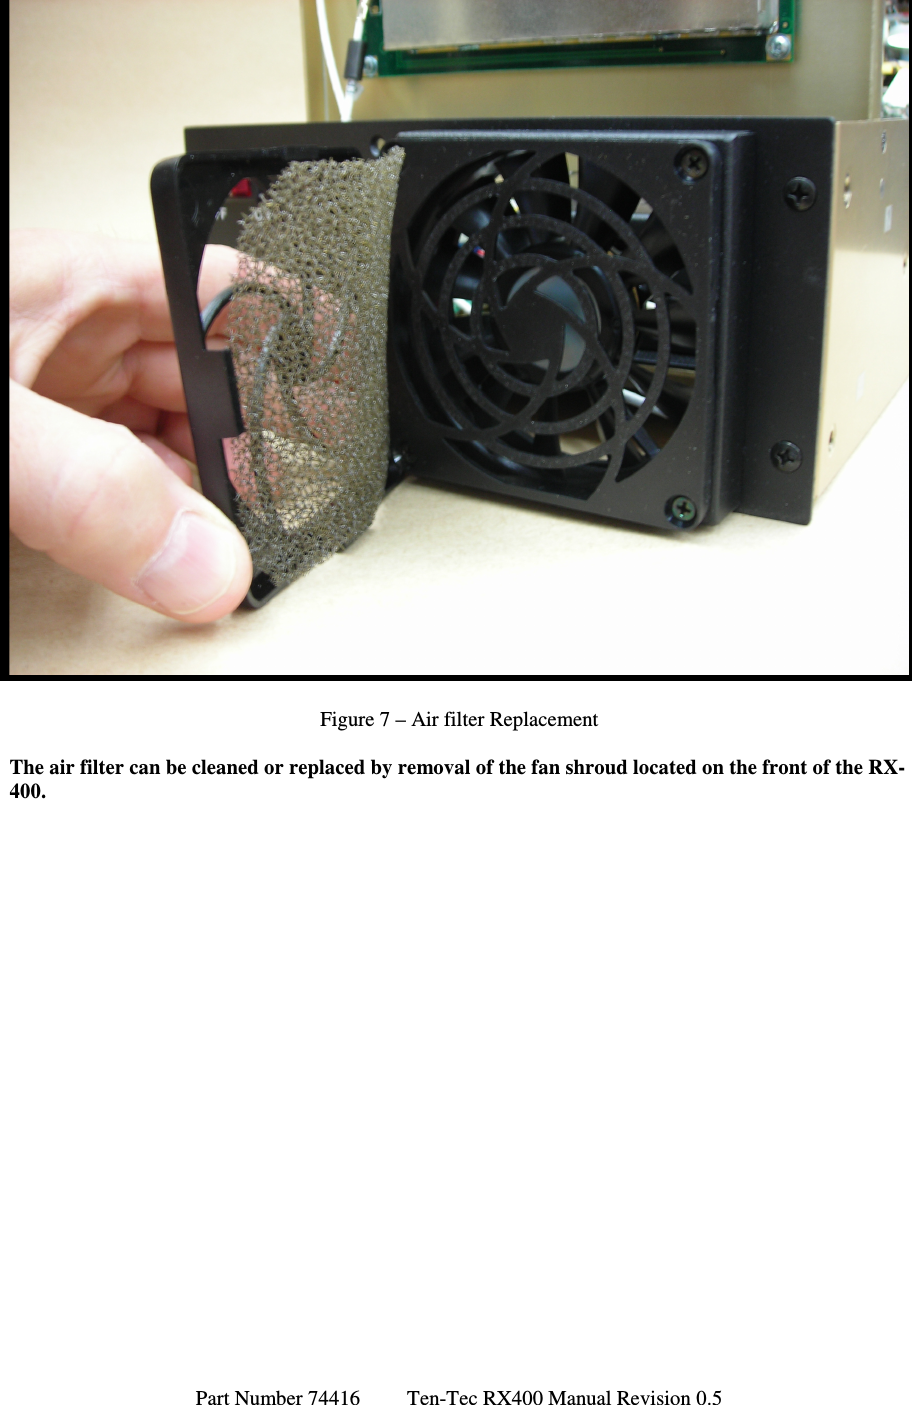 Part Number 74416         Ten-Tec RX400 Manual Revision 0.5  Figure 7 – Air filter Replacement  The air filter can be cleaned or replaced by removal of the fan shroud located on the front of the RX-400.  